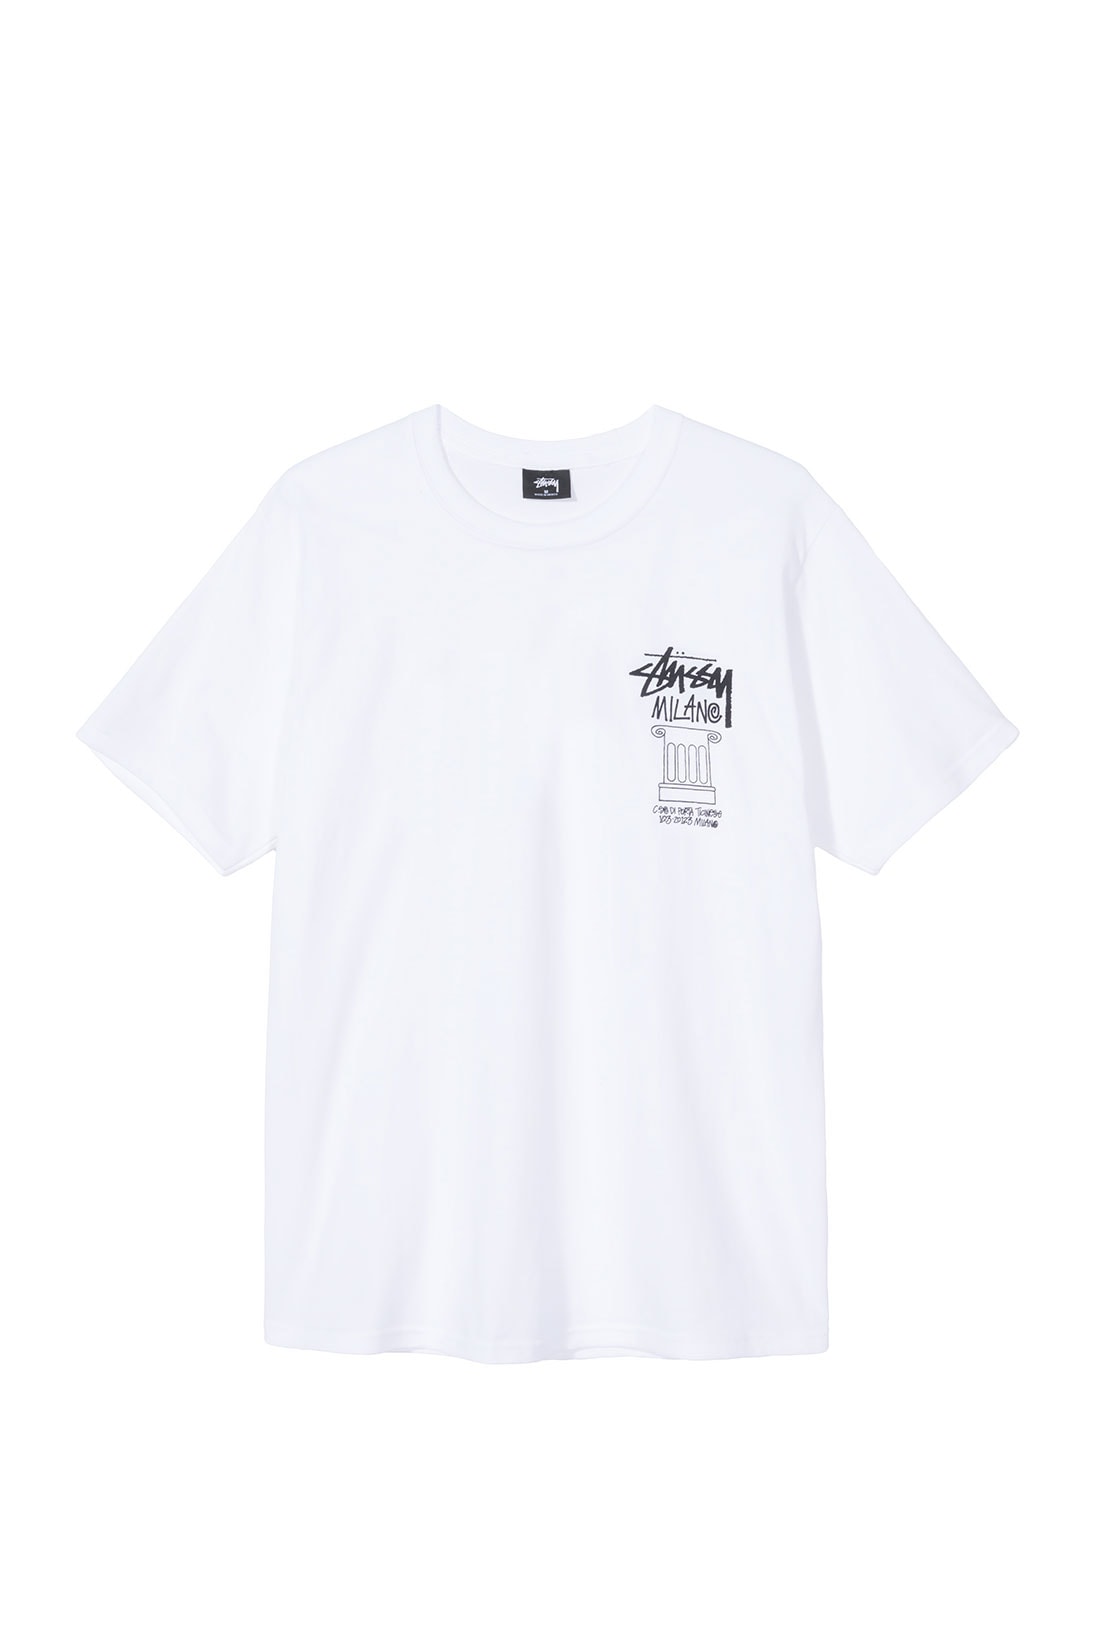 stussy milano chapter store milan retail limited edition t shirts italy